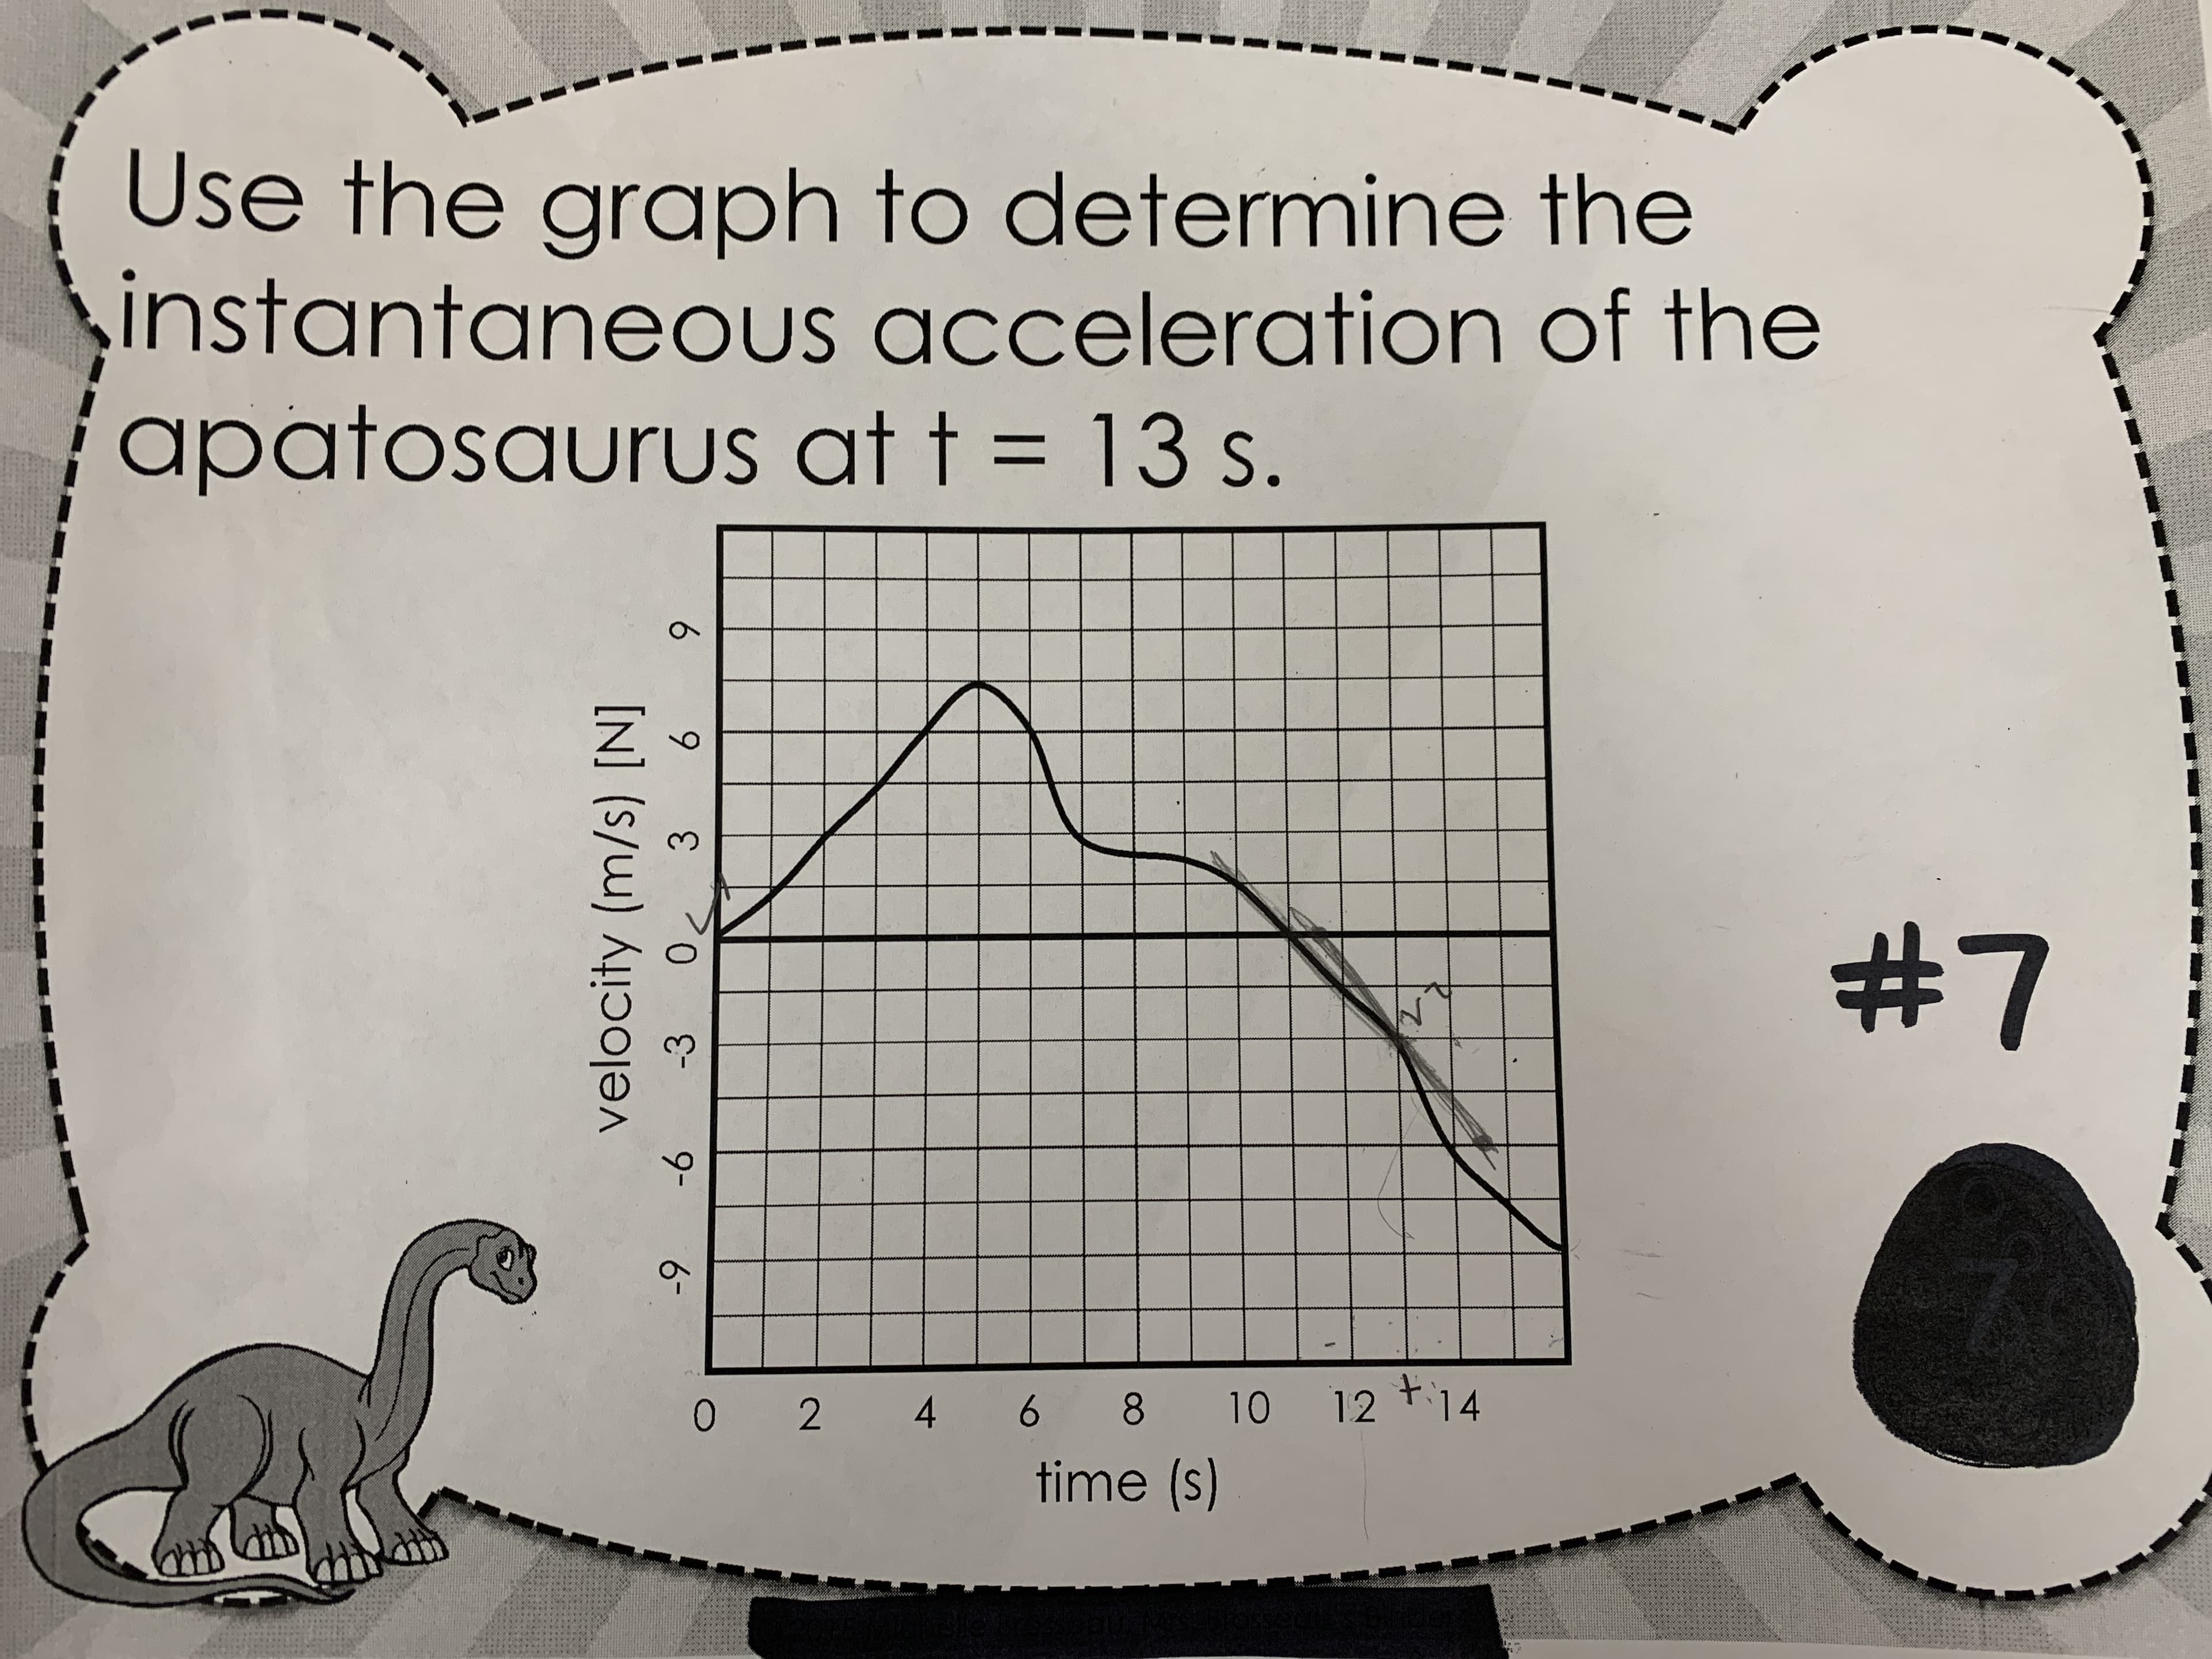 Use the graph to determine the
instantaneous acceleration of the
apatosaurus t = 13 s.
||
L#
6-
0 2 4 6
8
12 +14
time (s)
velocity (m/s) [N]
-9
-6
-3 0, 3 6 9
